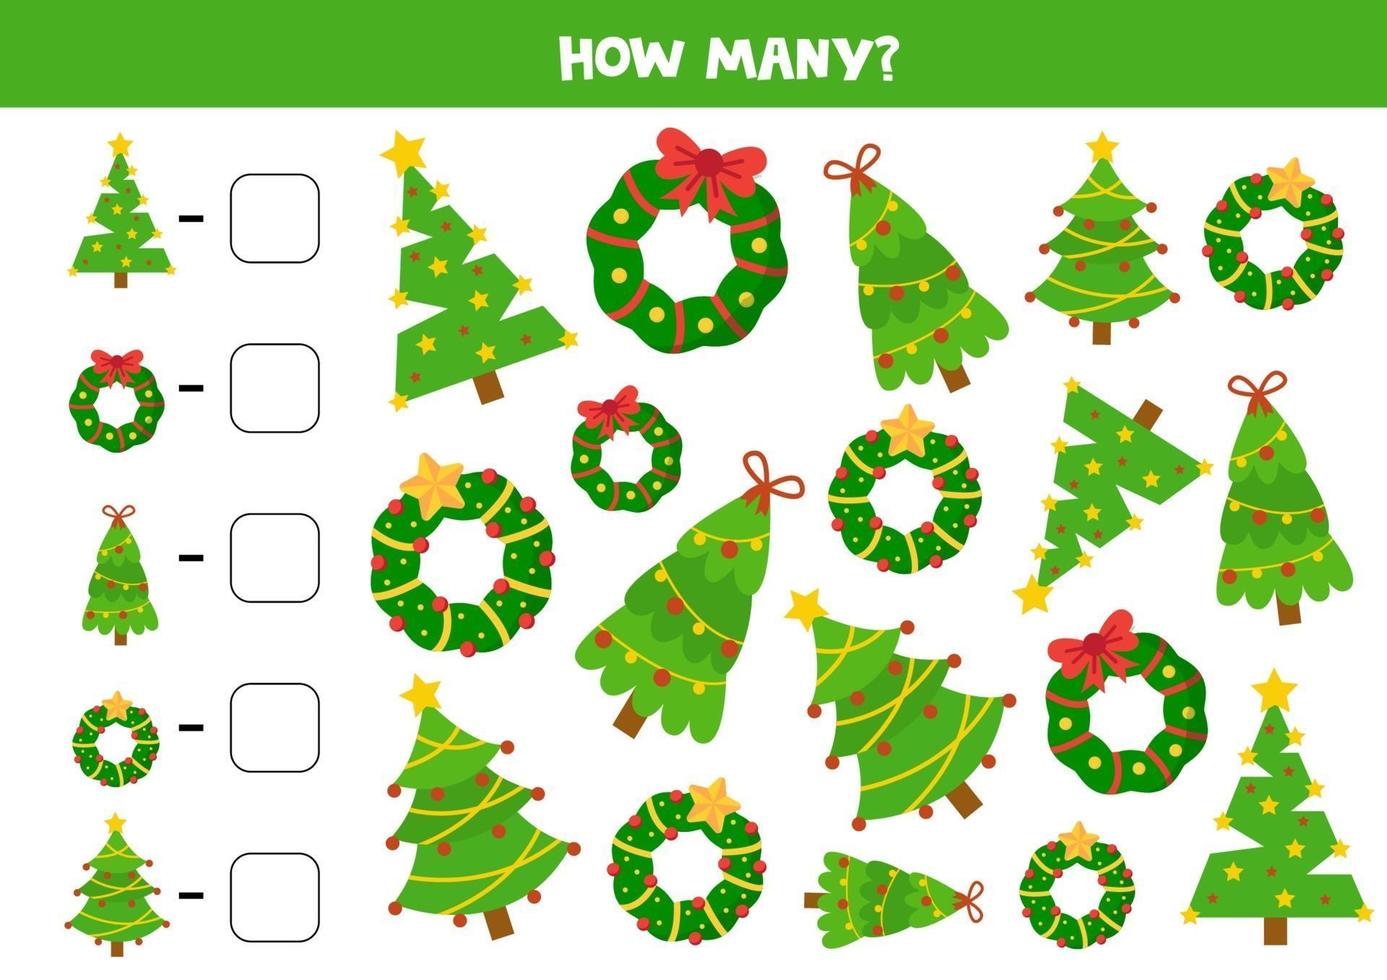 Math game for kids. Counting game with Christmas wreaths. vector